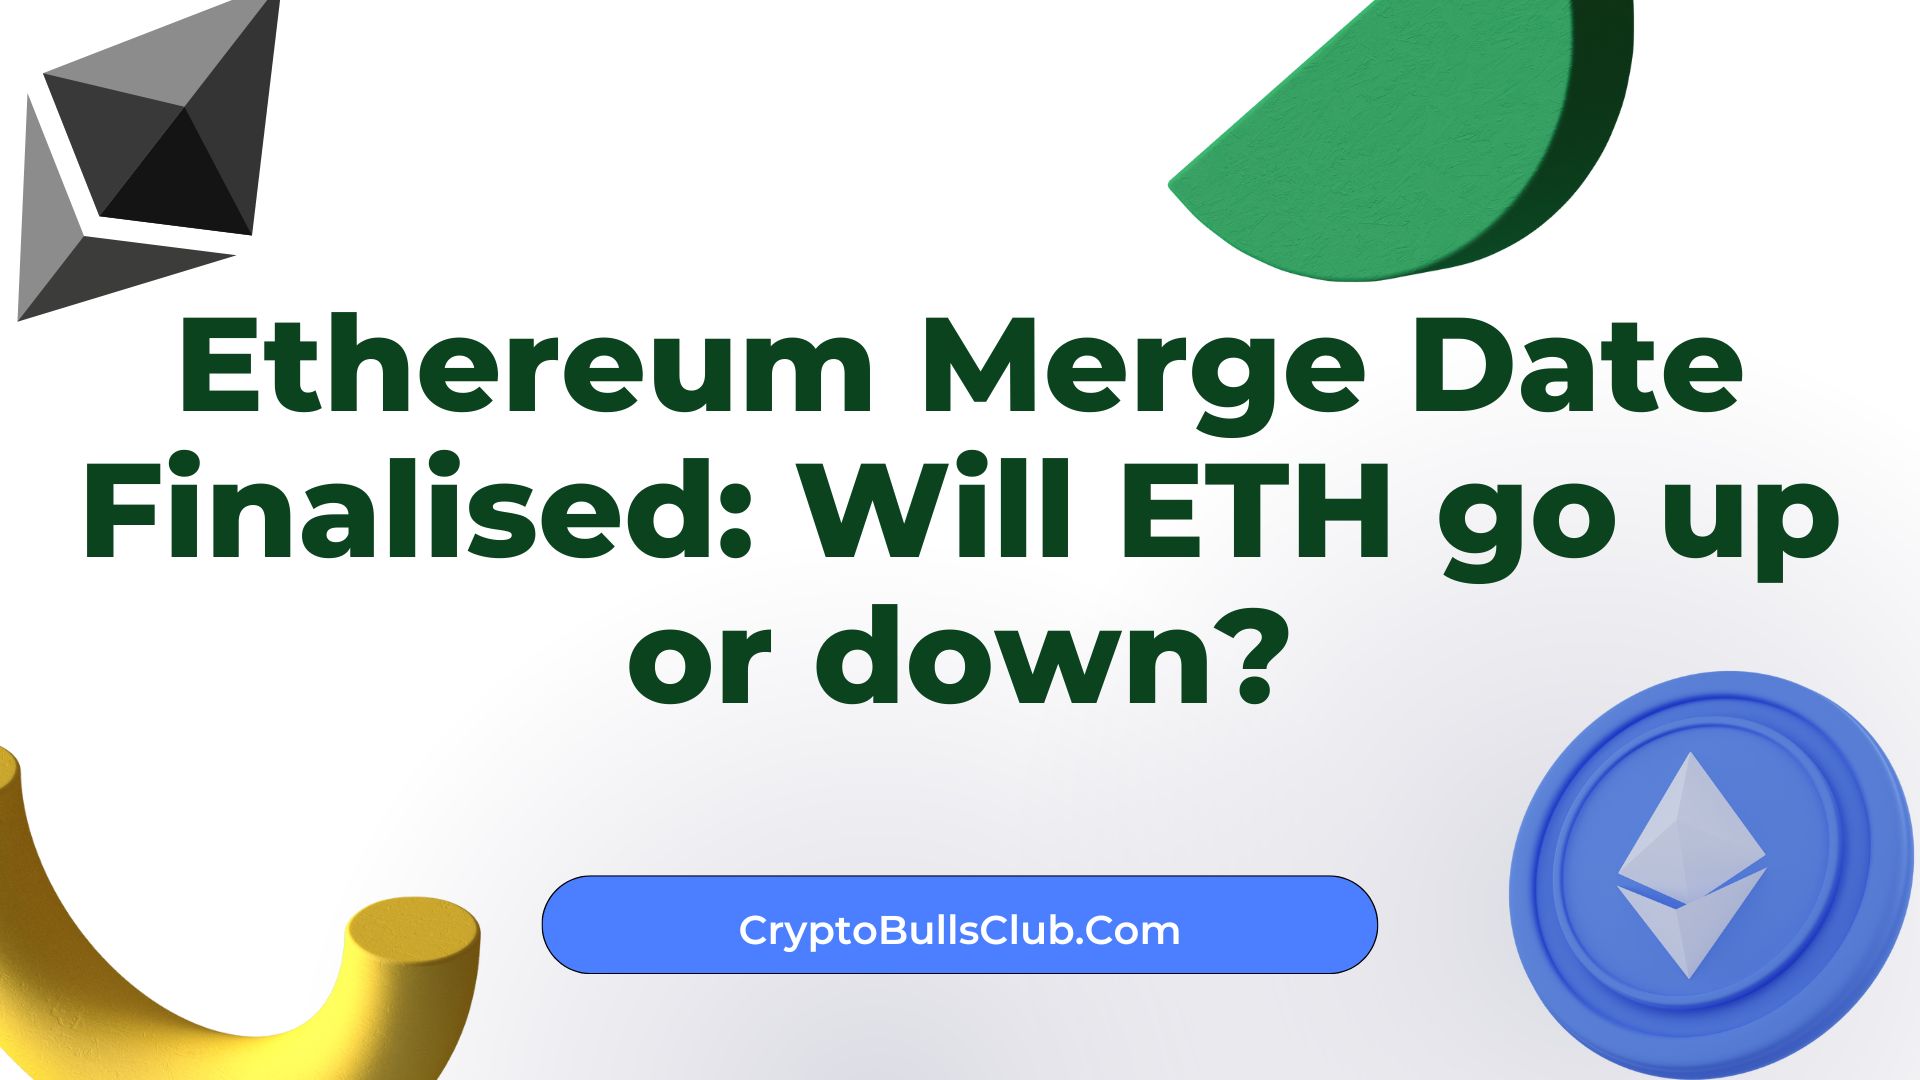 Ethereum Merge Date Finalised: Will ETH go up or down?